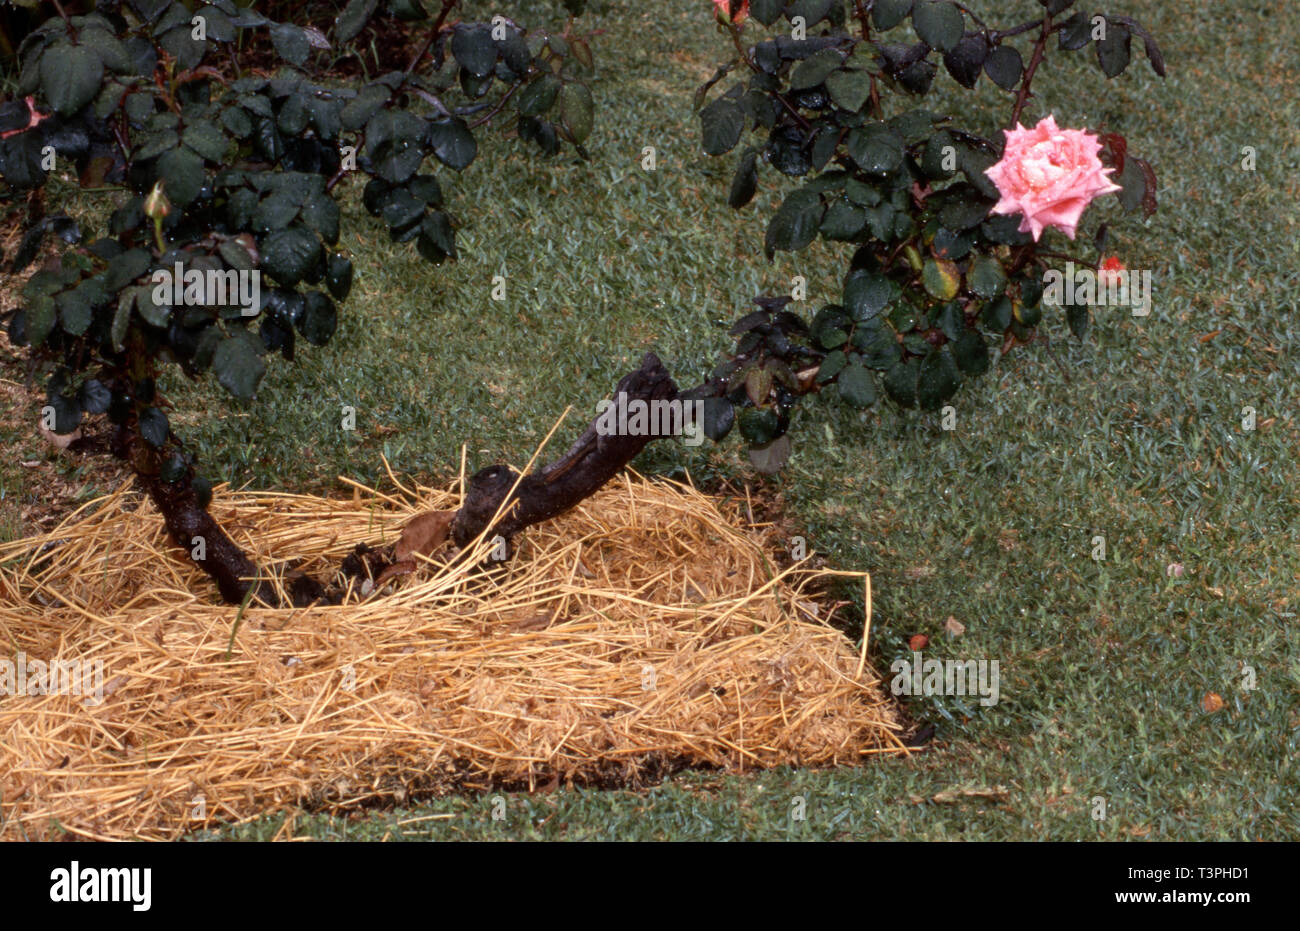 Straw mulch used around the base of a pink rose bush (Rosa). Straw will compost pretty quickly in most garden settings. Stock Photo